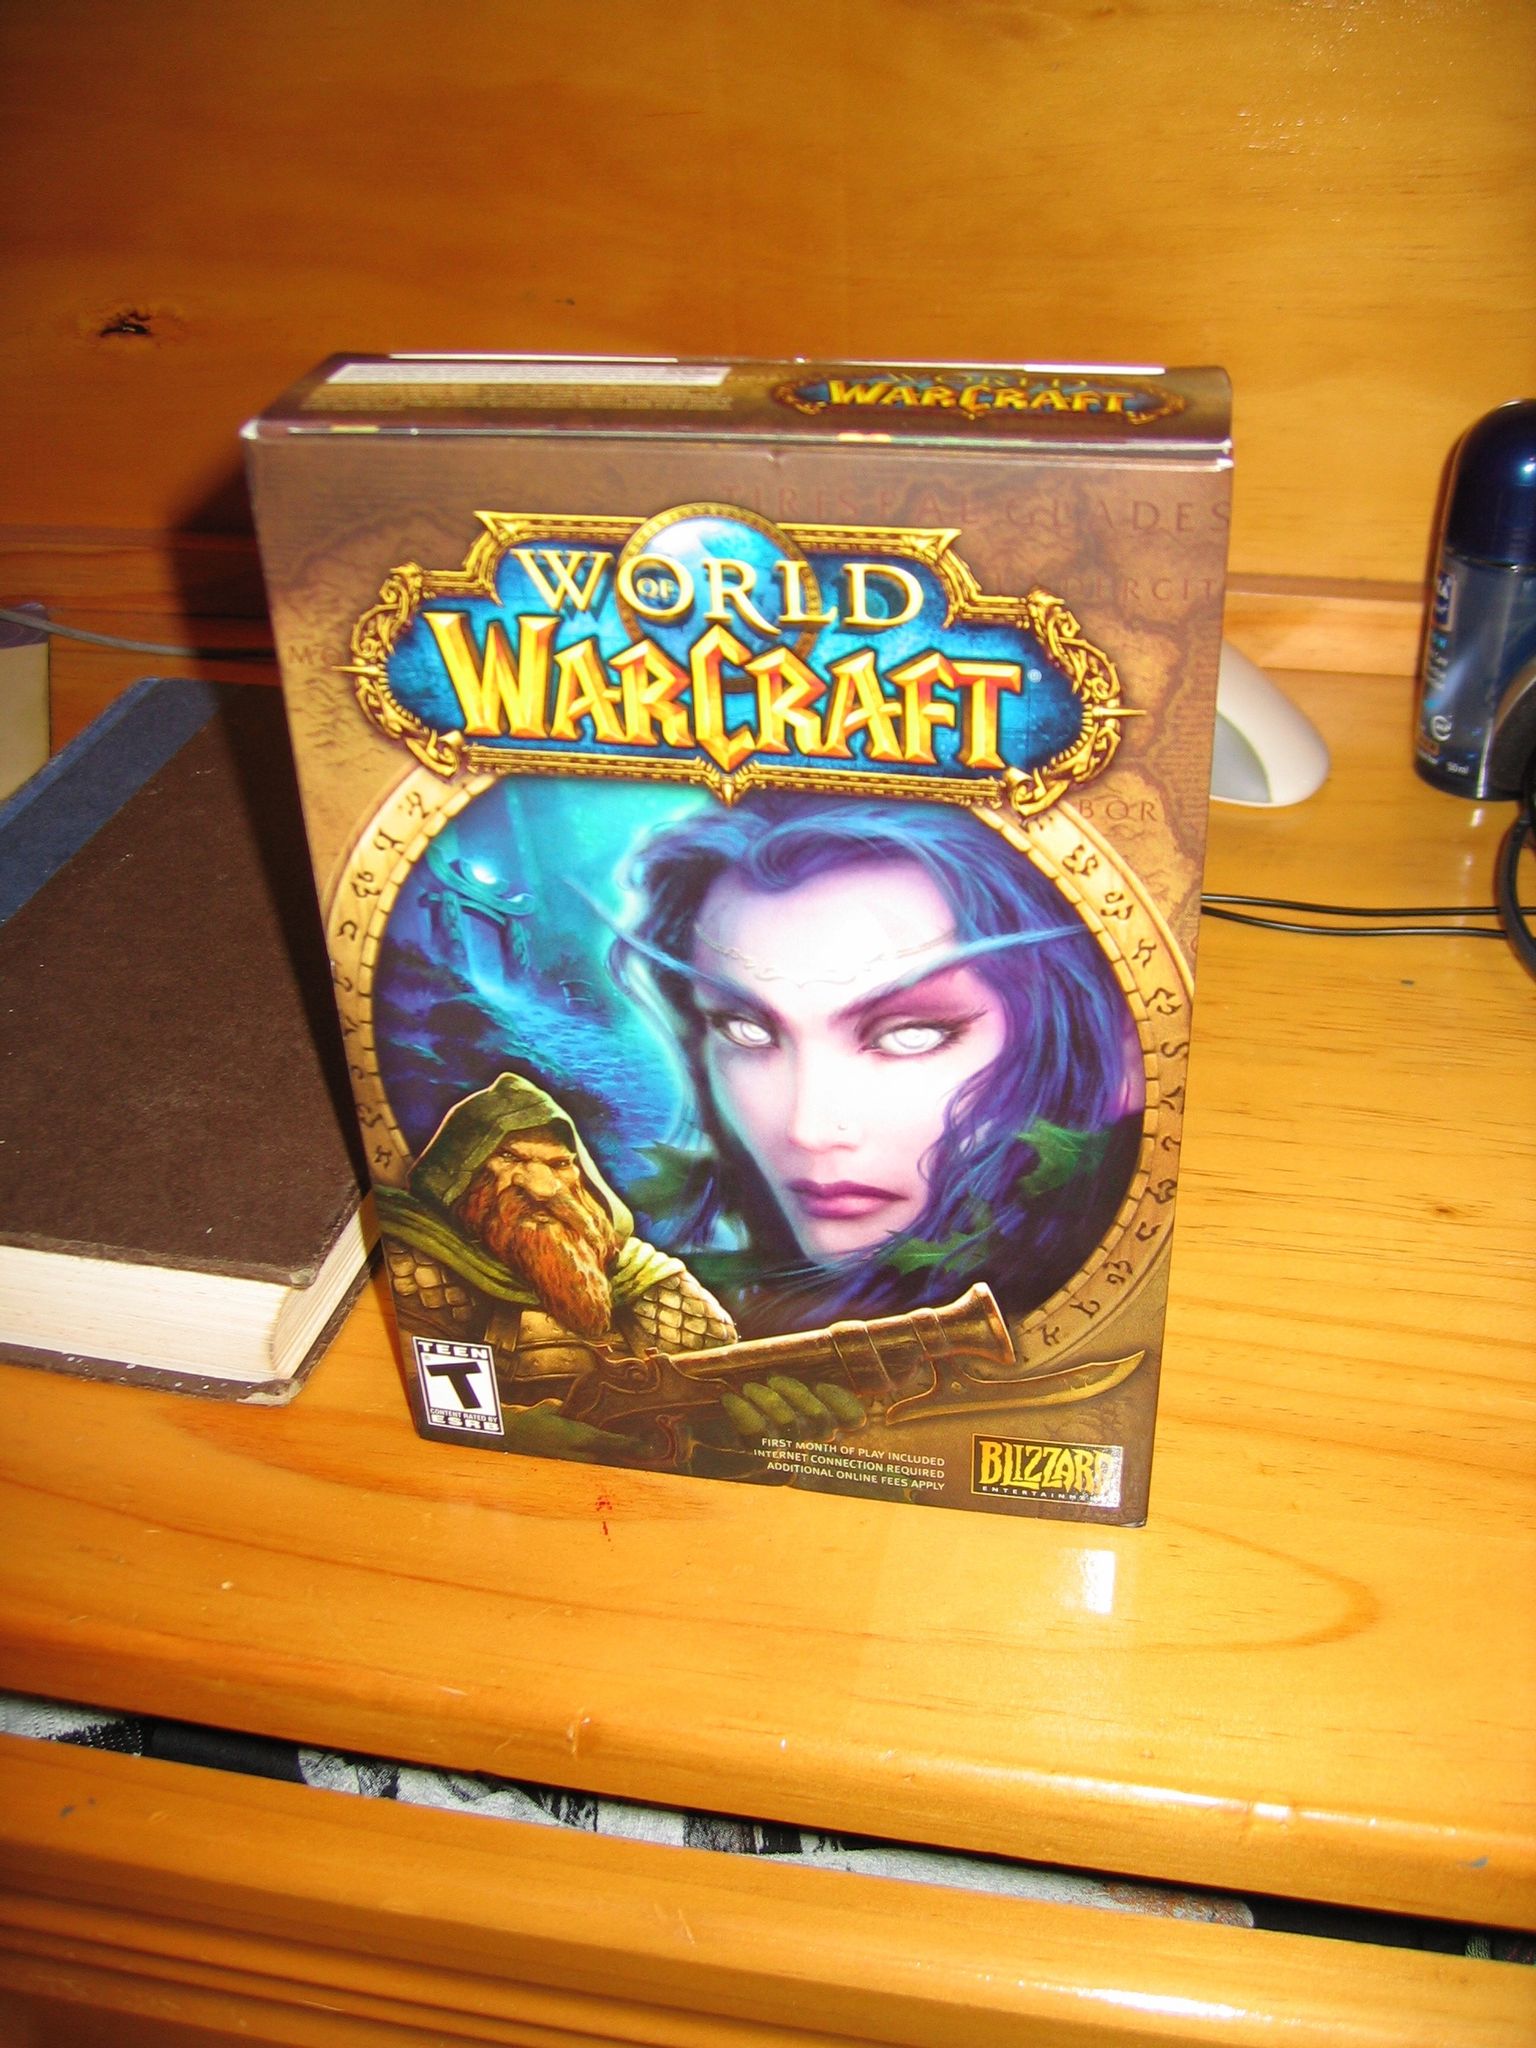 A photo of the box of the original World of Warcraft.